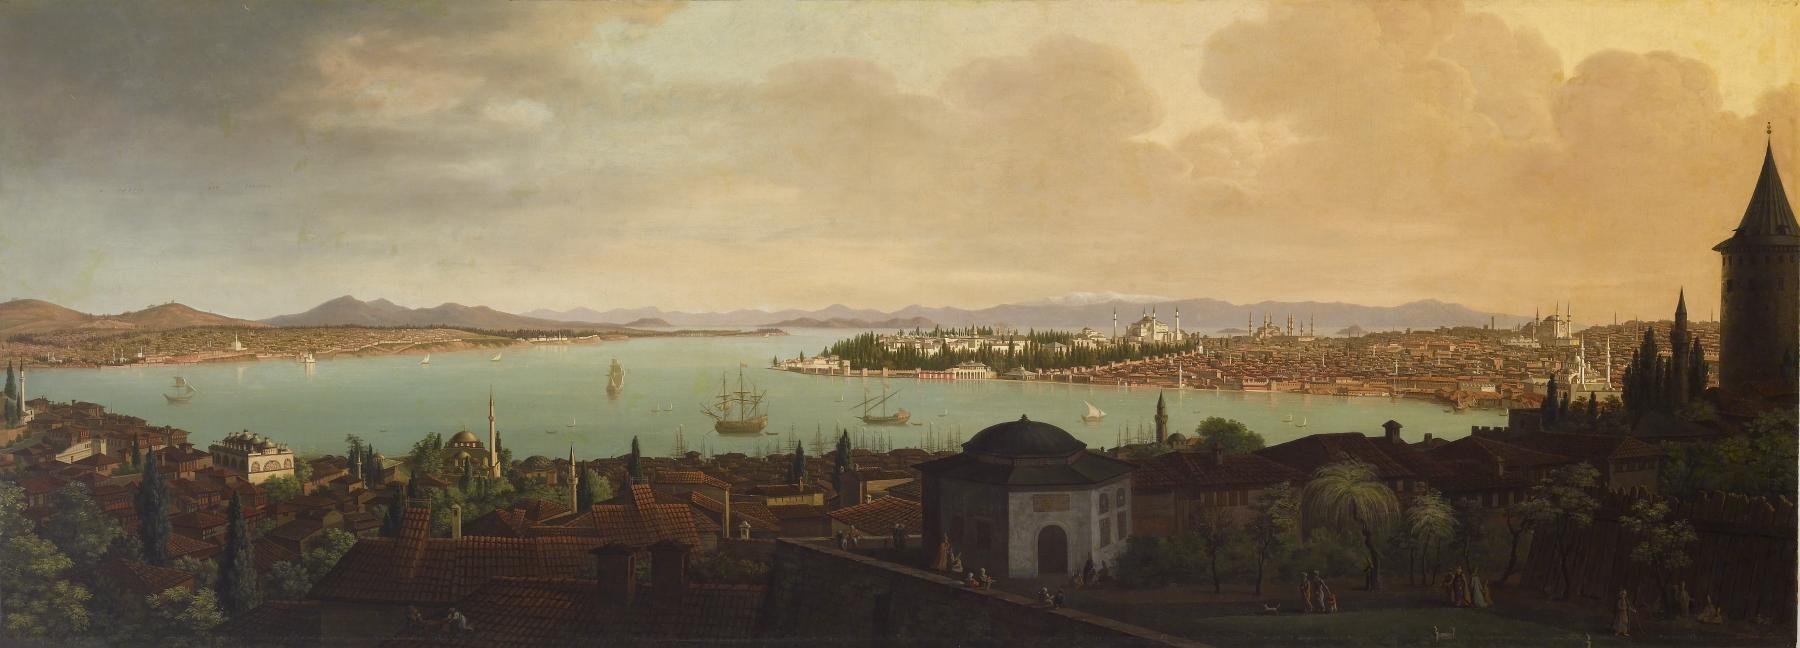 A wide landscape view of a city overlooking its harbour